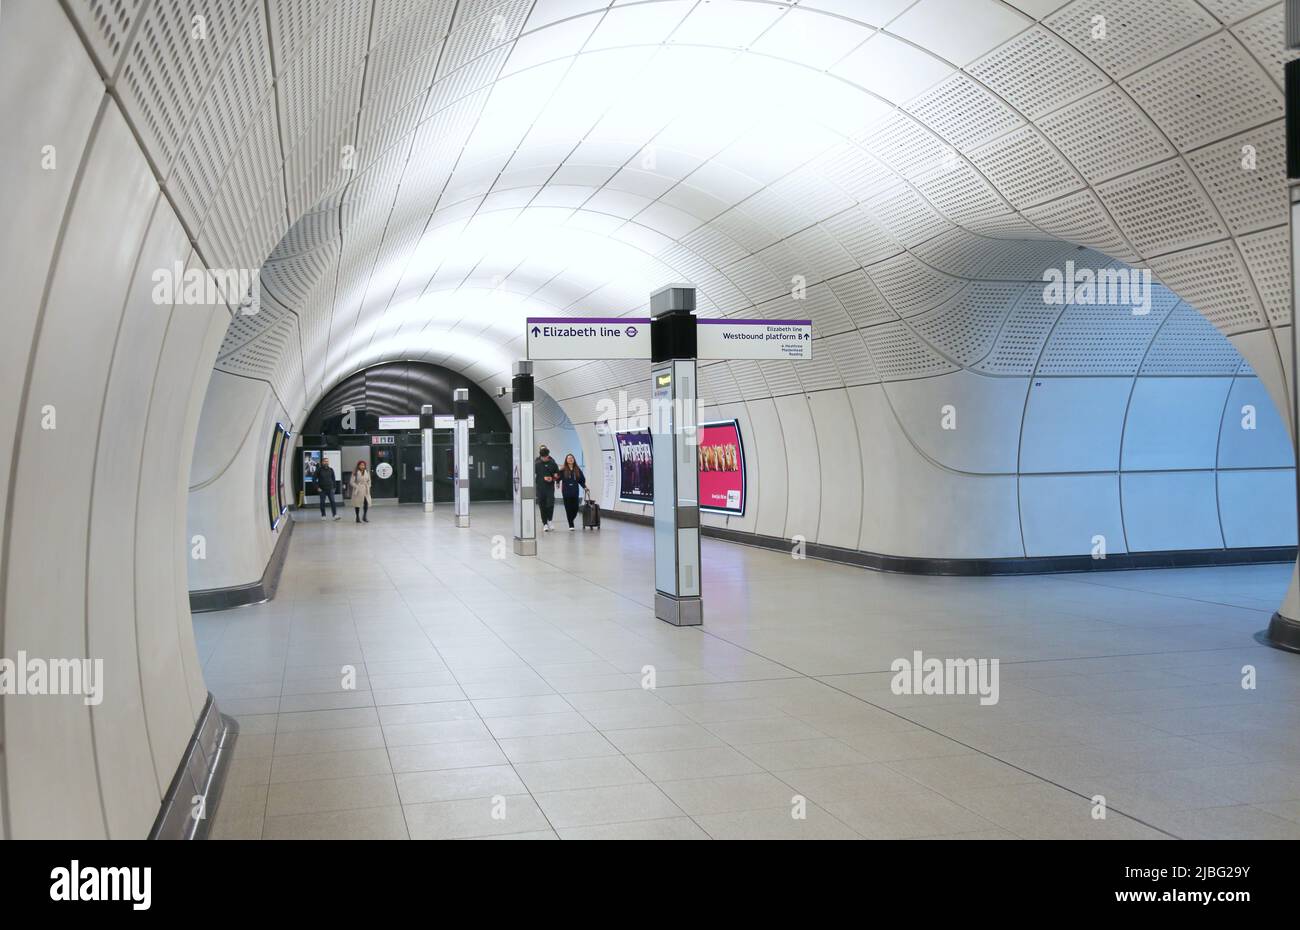 London, UK. Underground tunnels at Farringdon Station on the new Elizabeth Line (Crossrail) network. Signs direct to east or west-bound platforms. Stock Photo